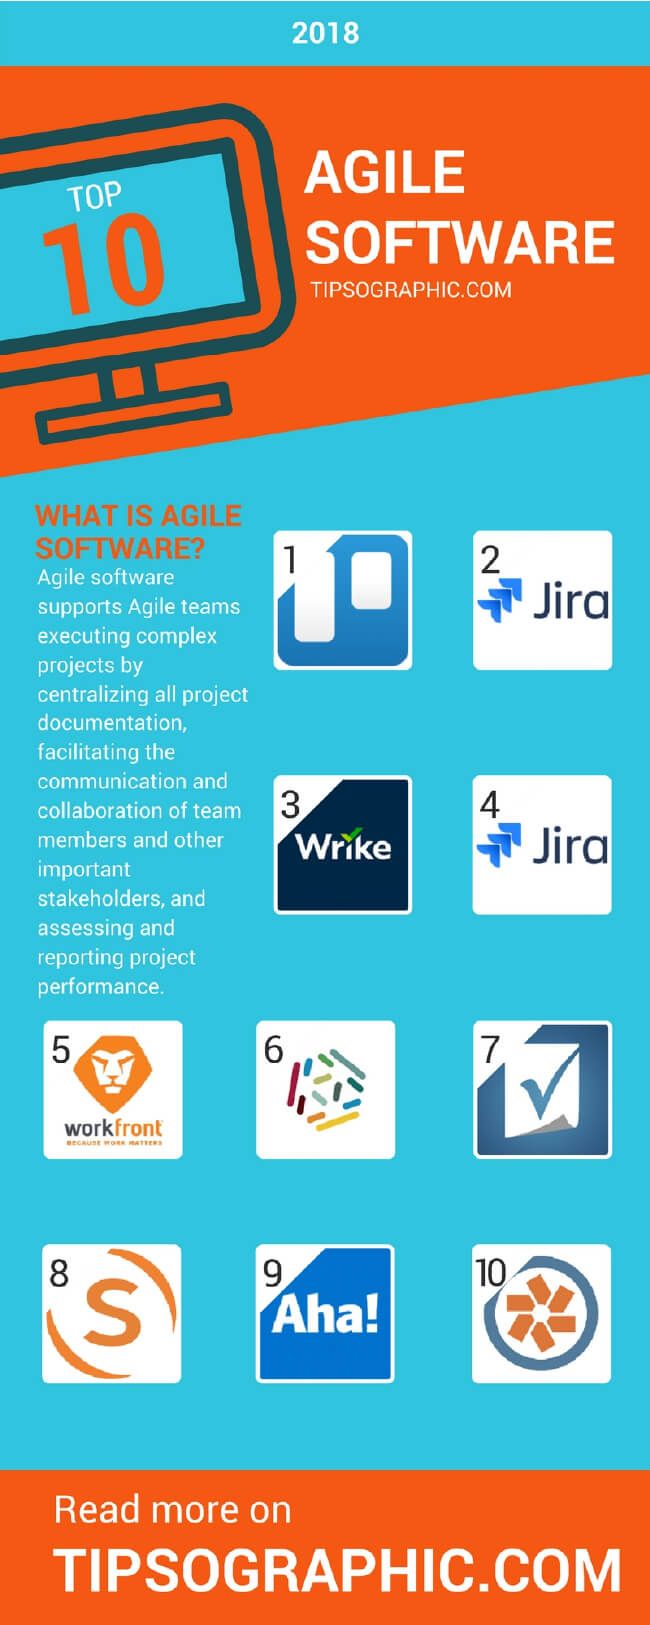 Image titled agile software 2018 best systems